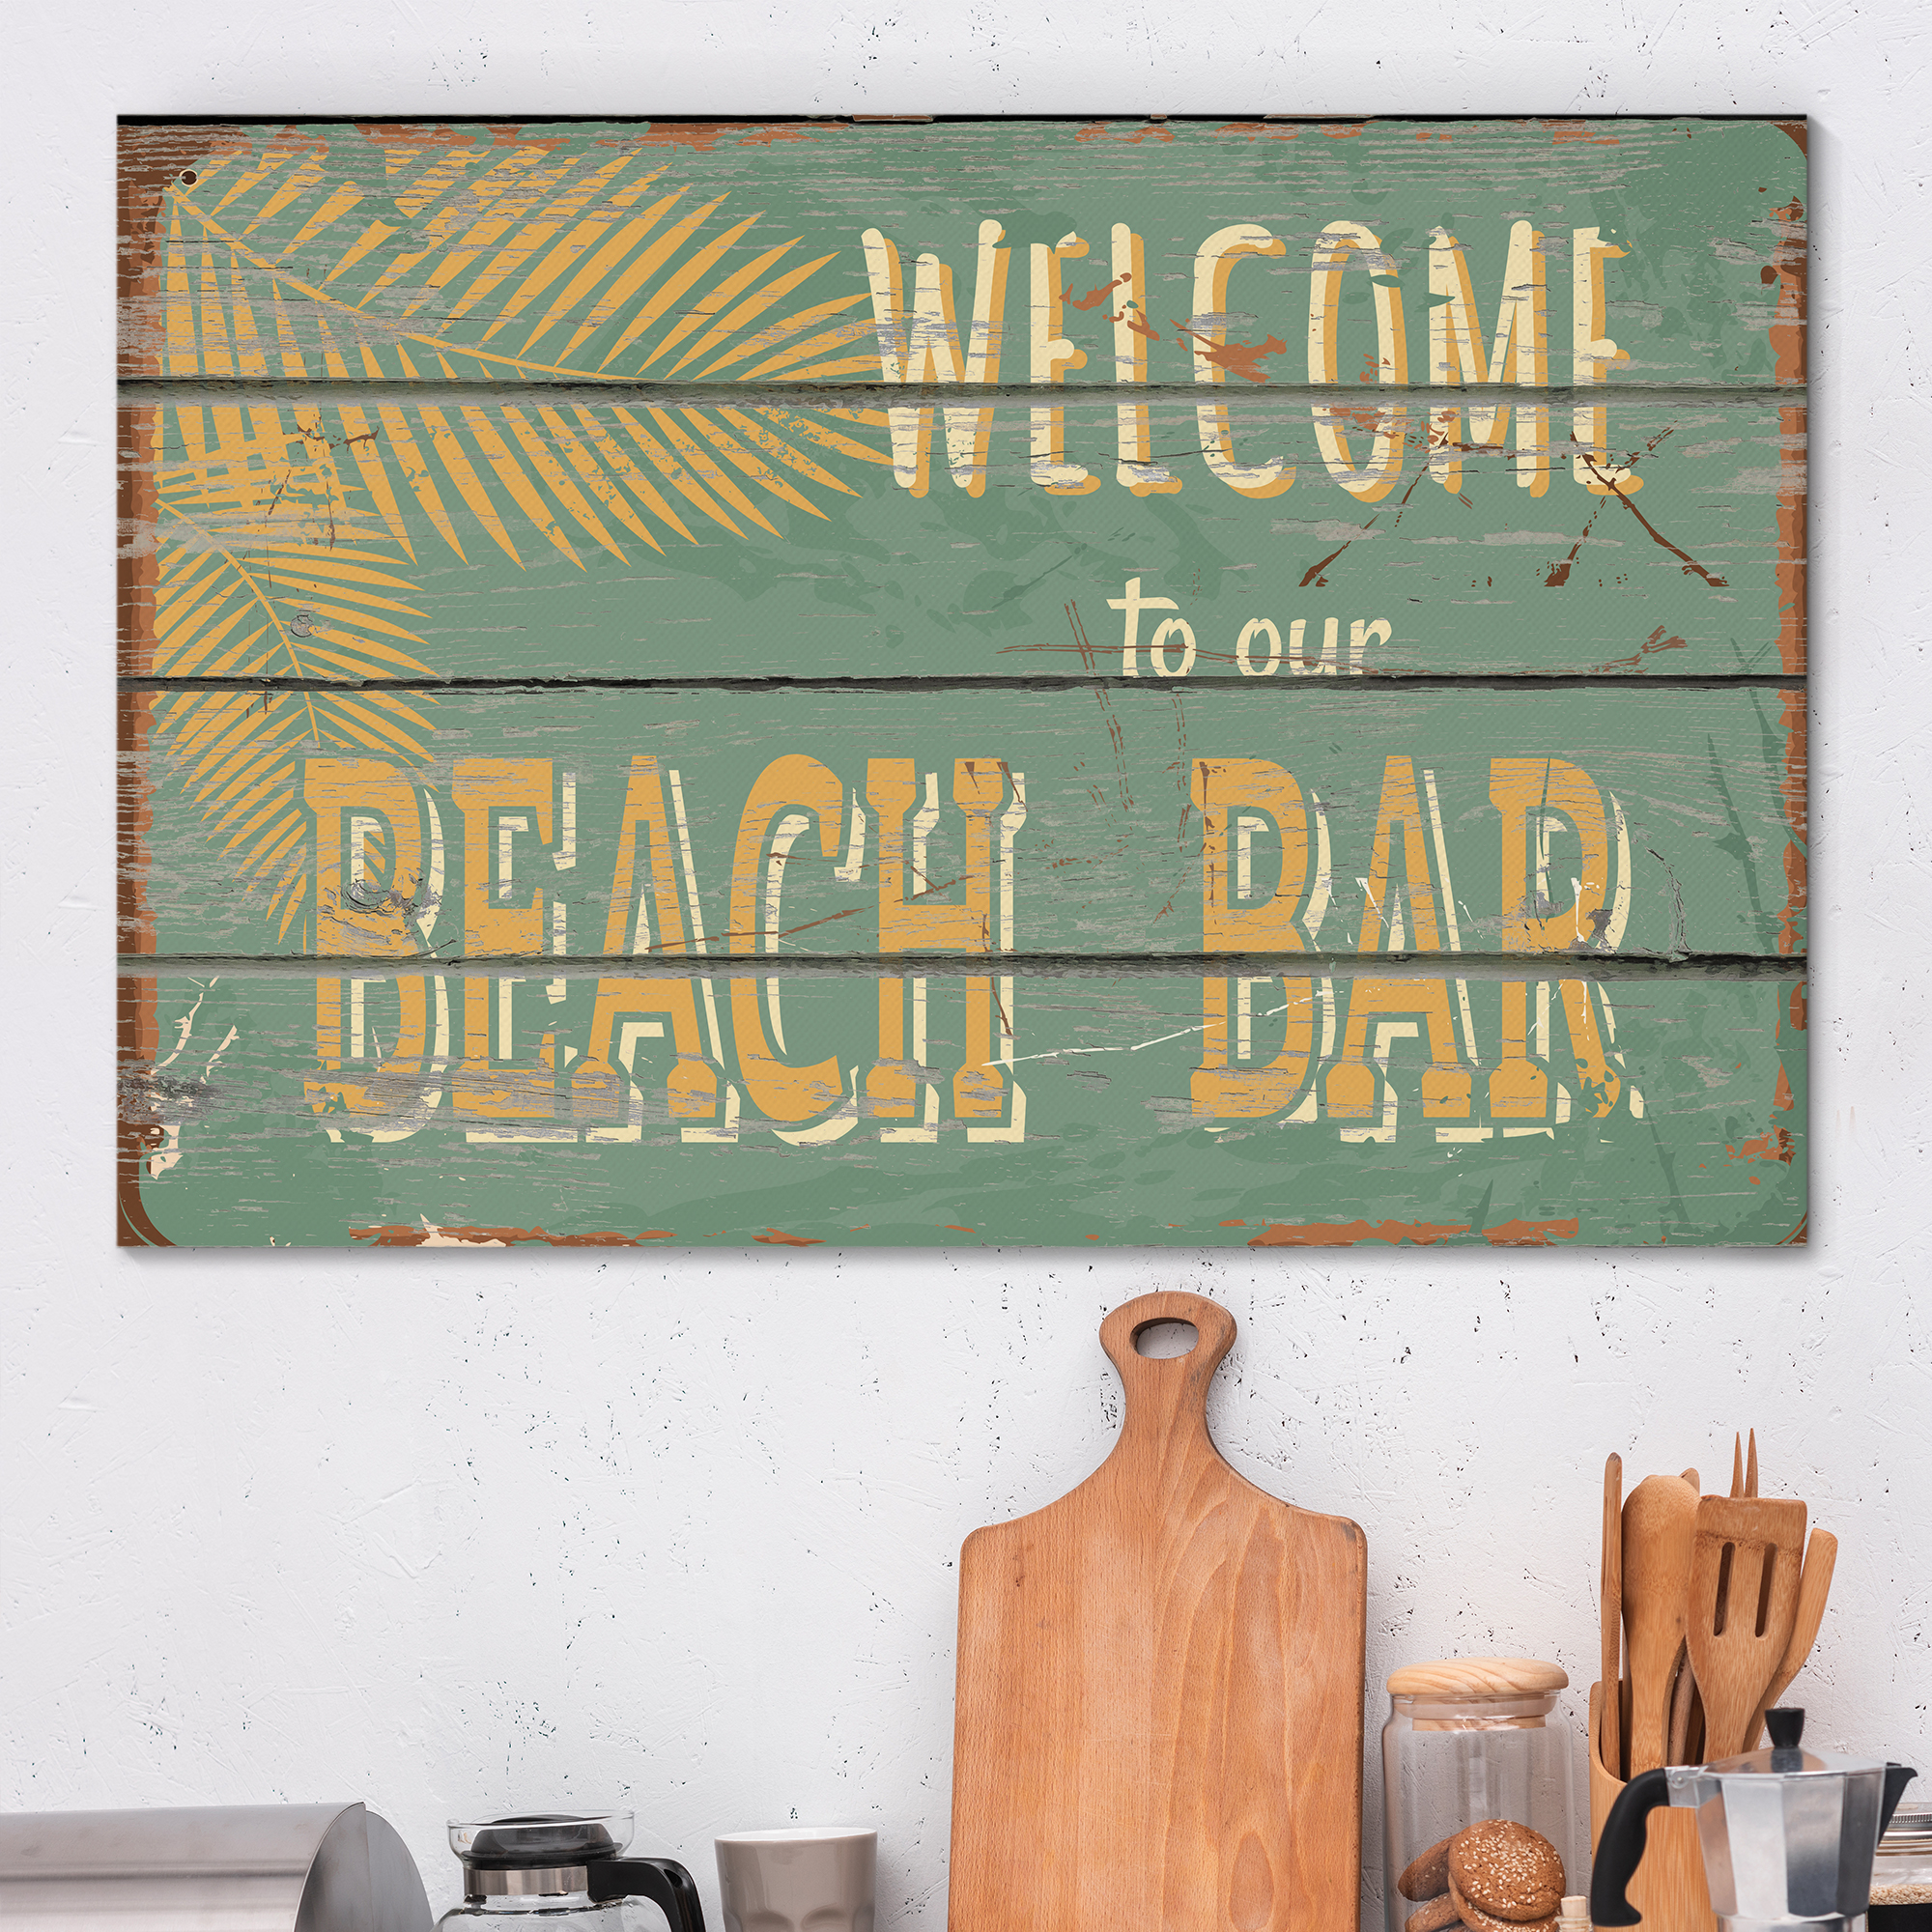 Rustic Wooden Welcome to Our Beach Bar Sign - Canvas Art Home Art - 24x36 inches